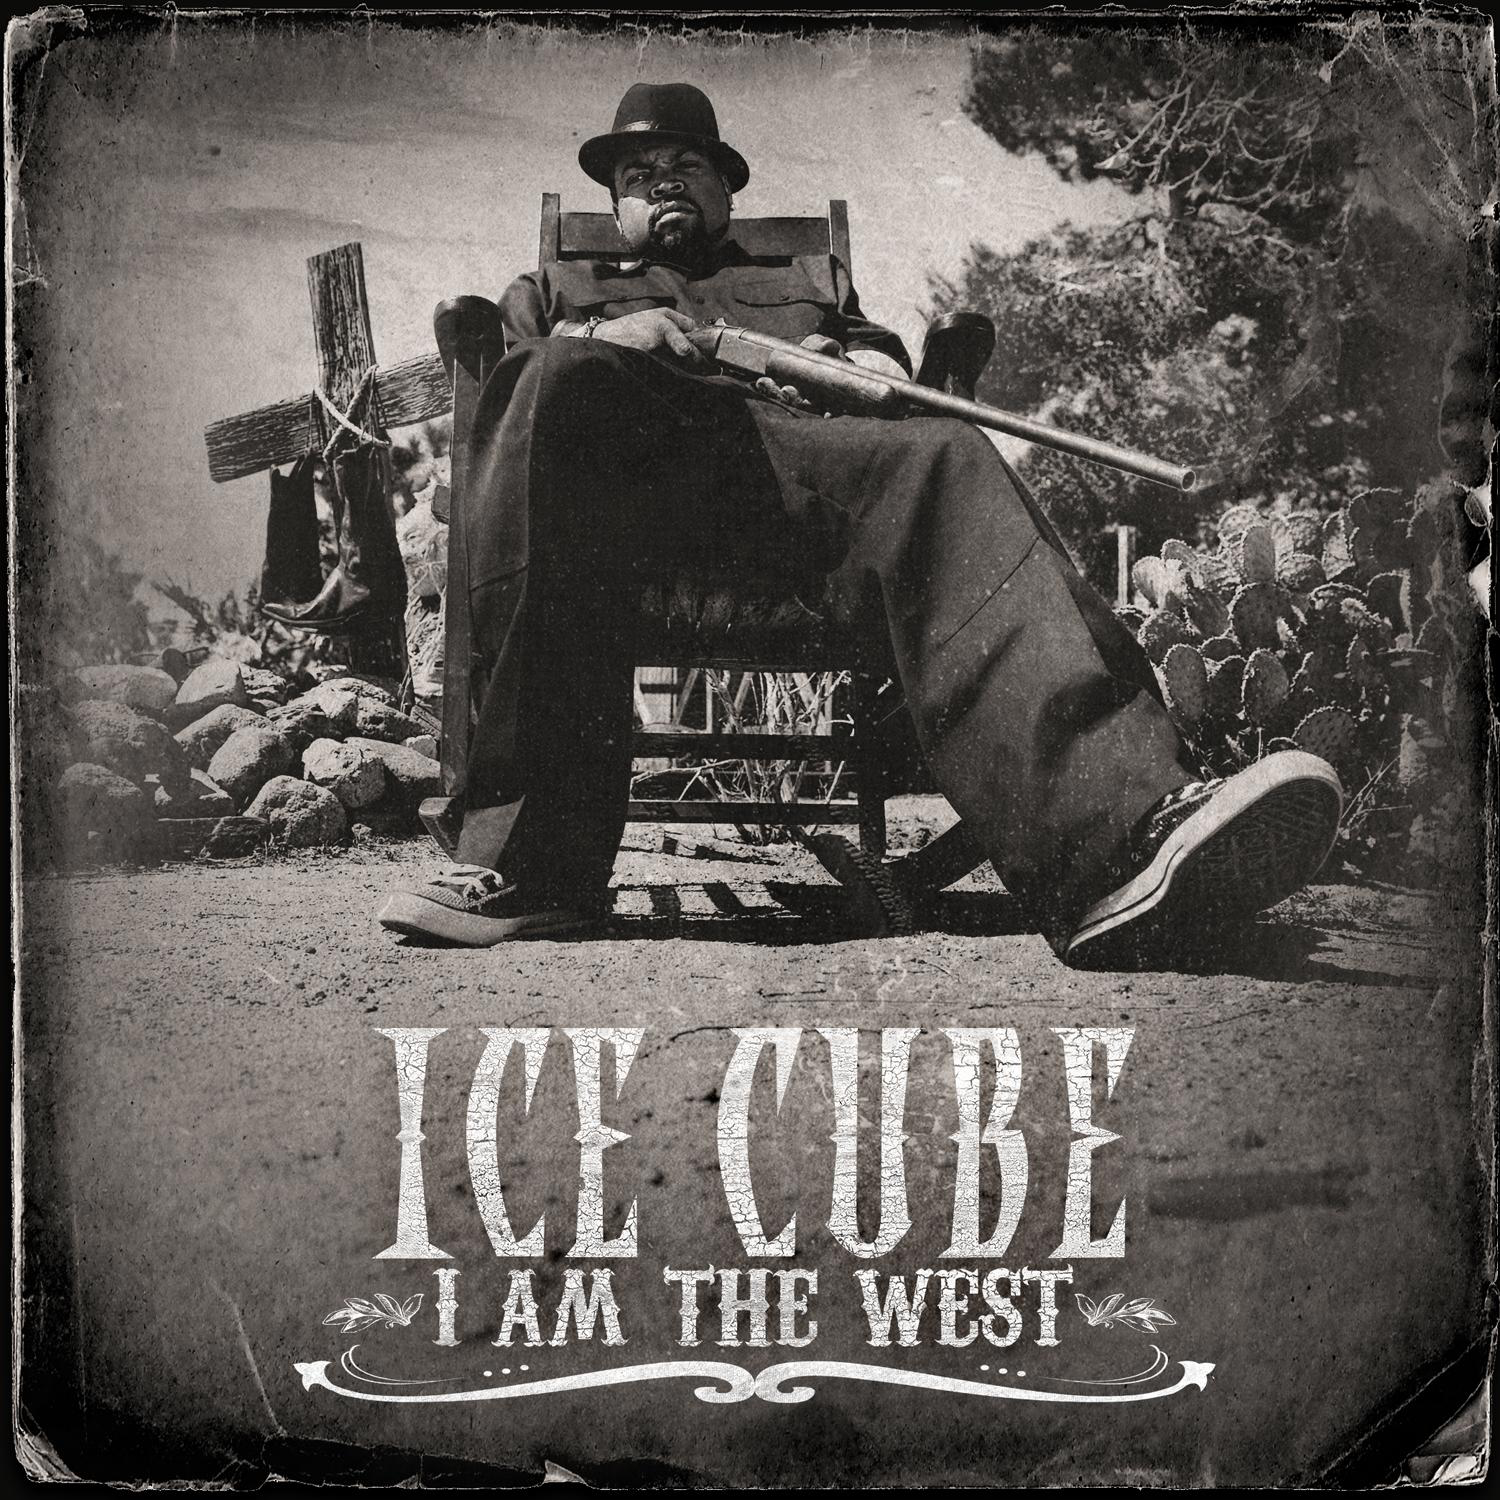 Art for I Rep that West (Dj Rukus QuickHitter) (Dirty) by Ice Cube Ft. Jigg